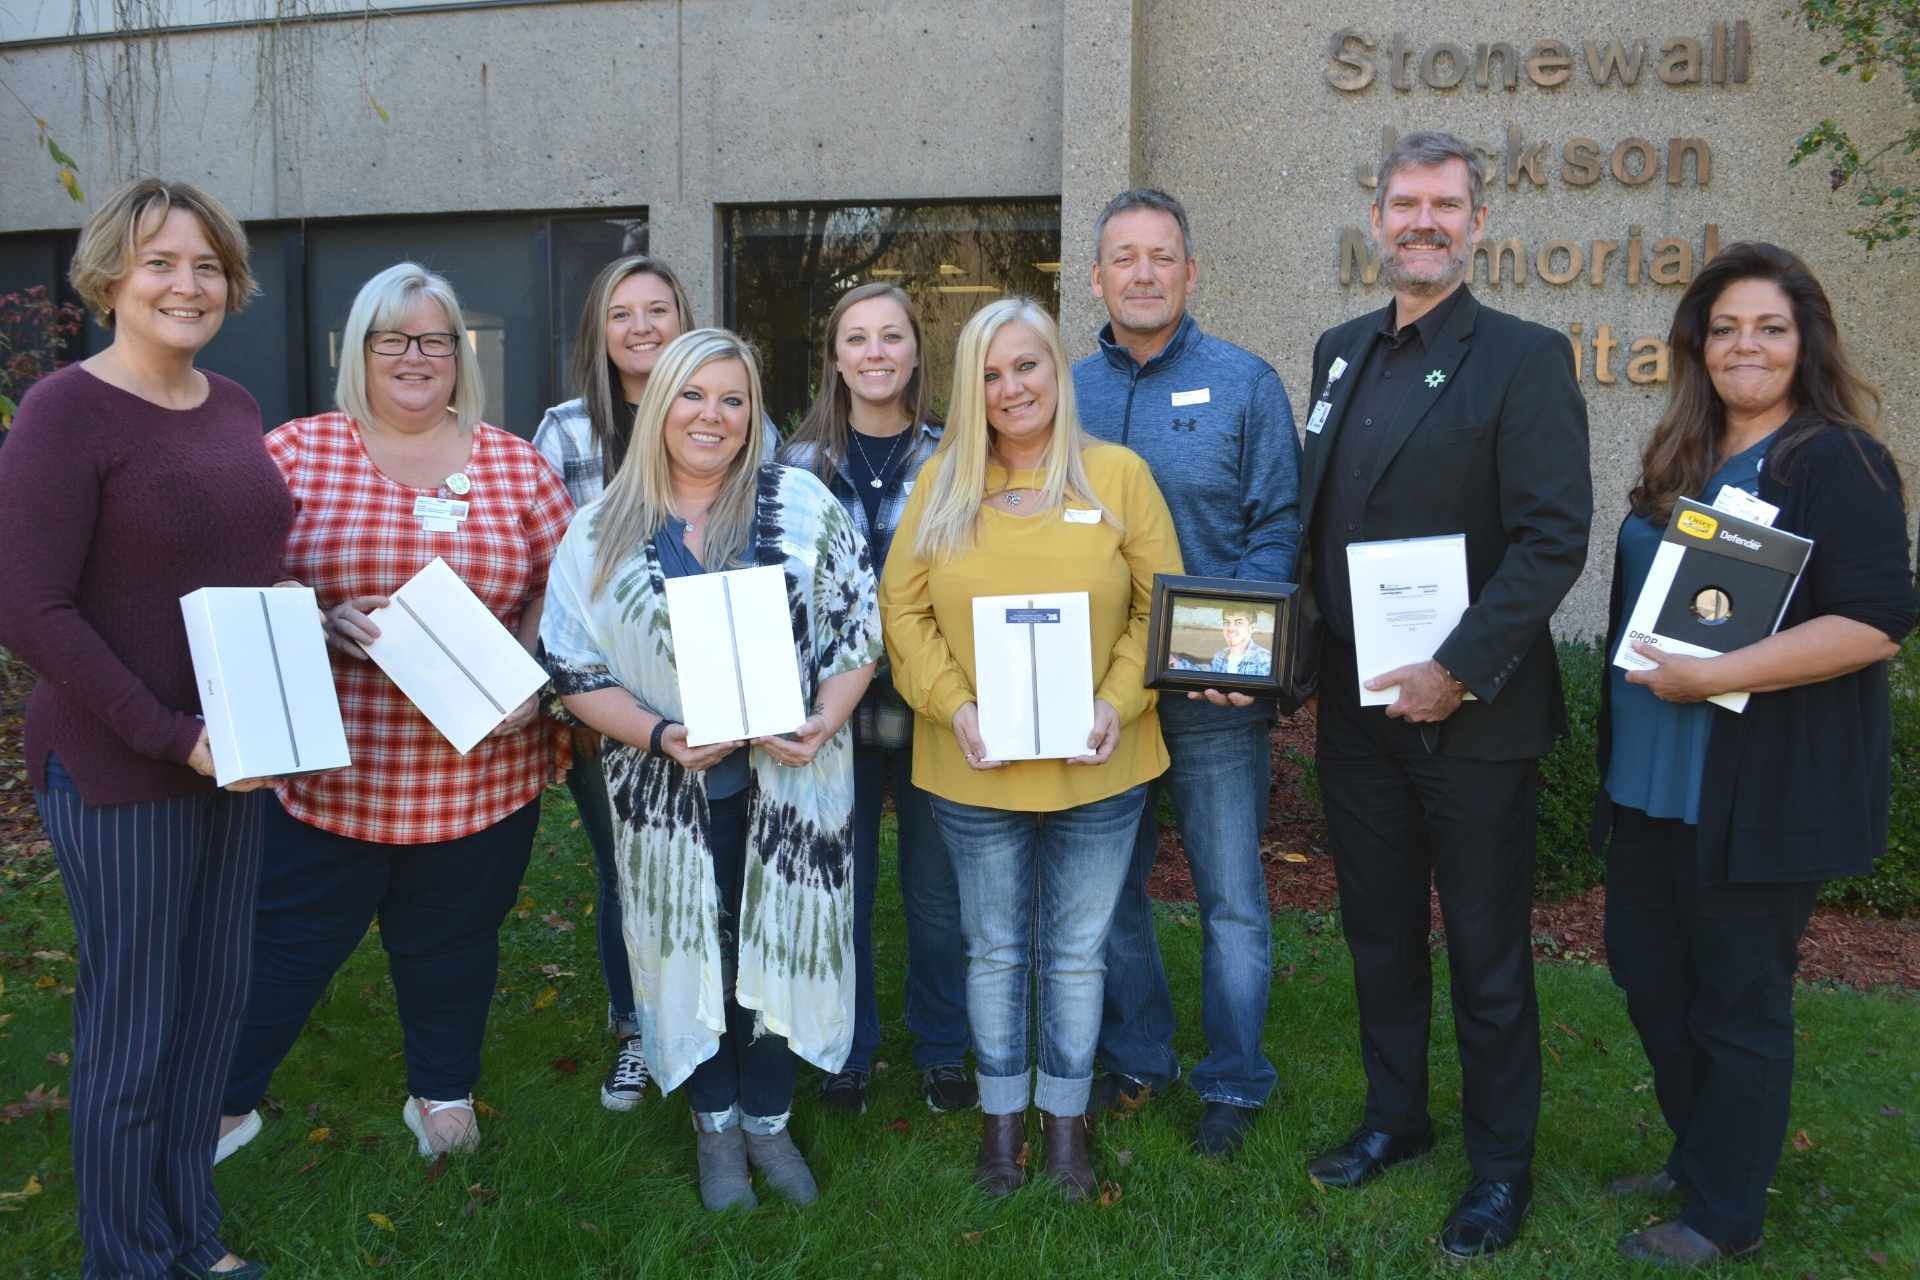 The family of the late Hunter Osborn donated iPads to Mon Health Stonewall Jackson Memorial Hospital for use by patients in his memory. Pictured above are family members and Mon Health staff receiving the iPads. Pictured front row L-R: sister Erica Weaver, mother Cindy Osborn; second row, L-R: SJMH staff member Jennifer Barnes, staff member Carla Hamner, Hunter’s girlfriend Tera Stout, sister Kayla Talbert, father Darin Osborn, SJMH CAO Kevin Stalnaker, and staff member Maria Maul.